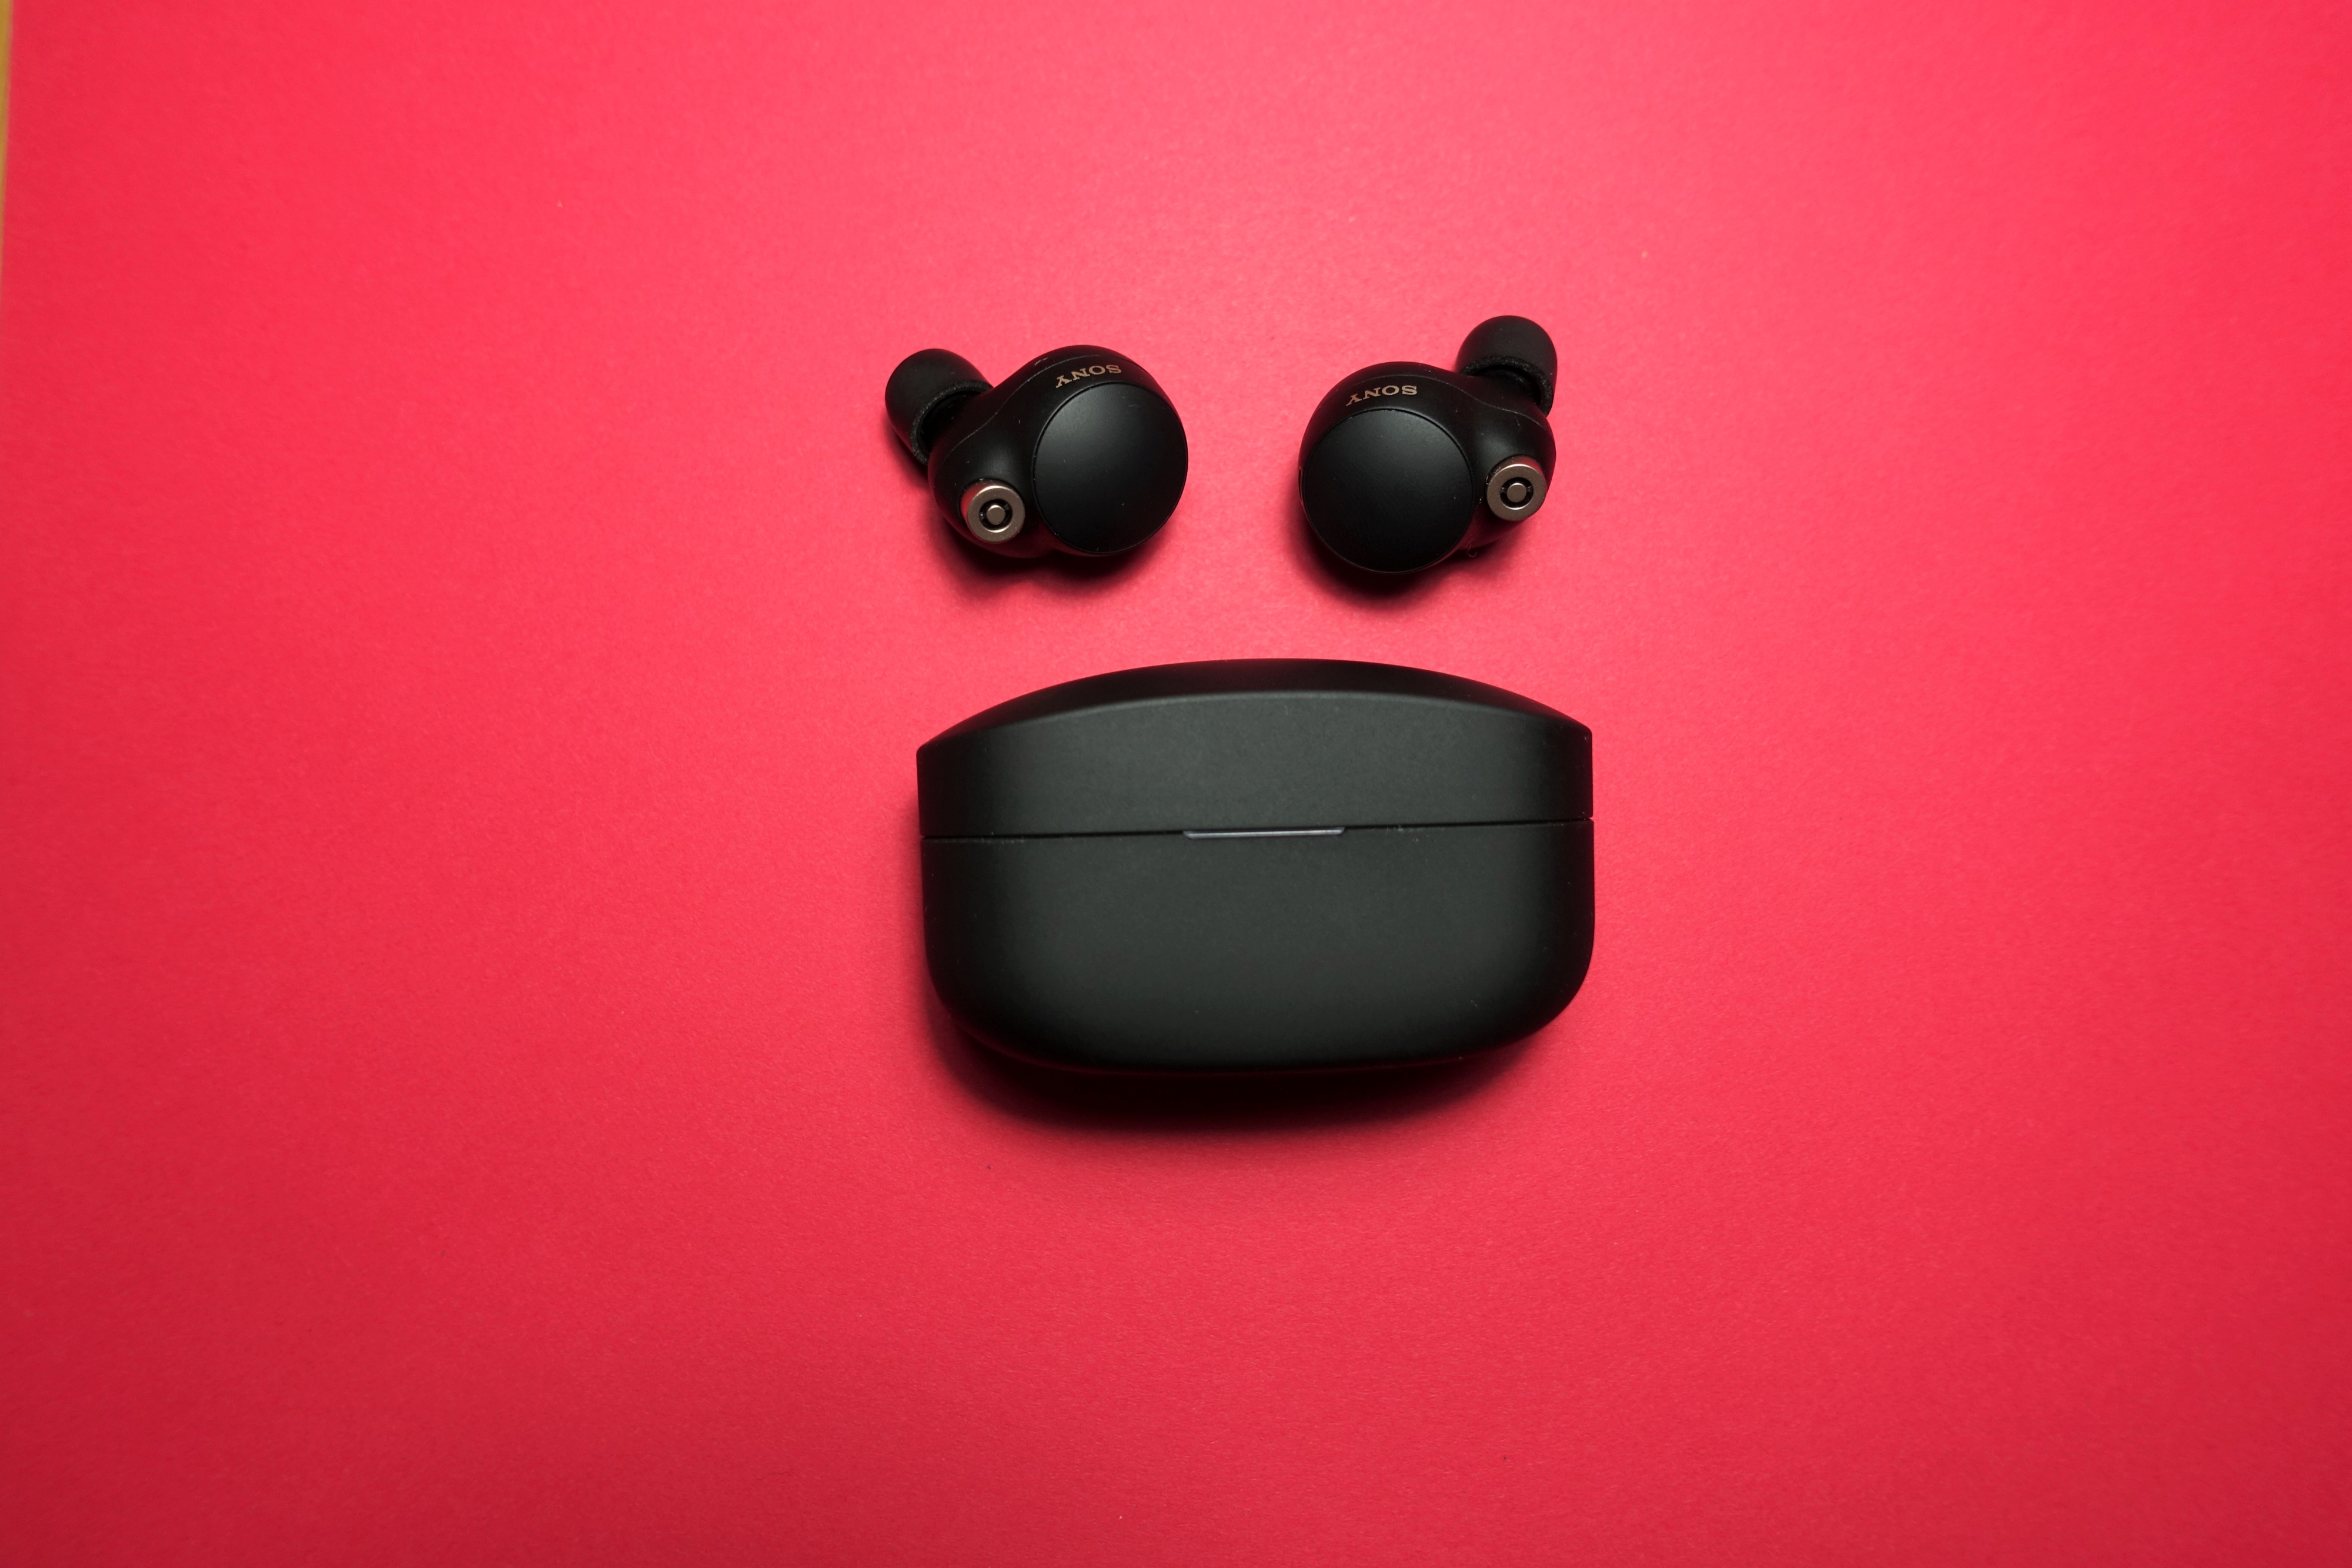 The WFXM4 is Sony's noise canceling answer to the AirPods Pro